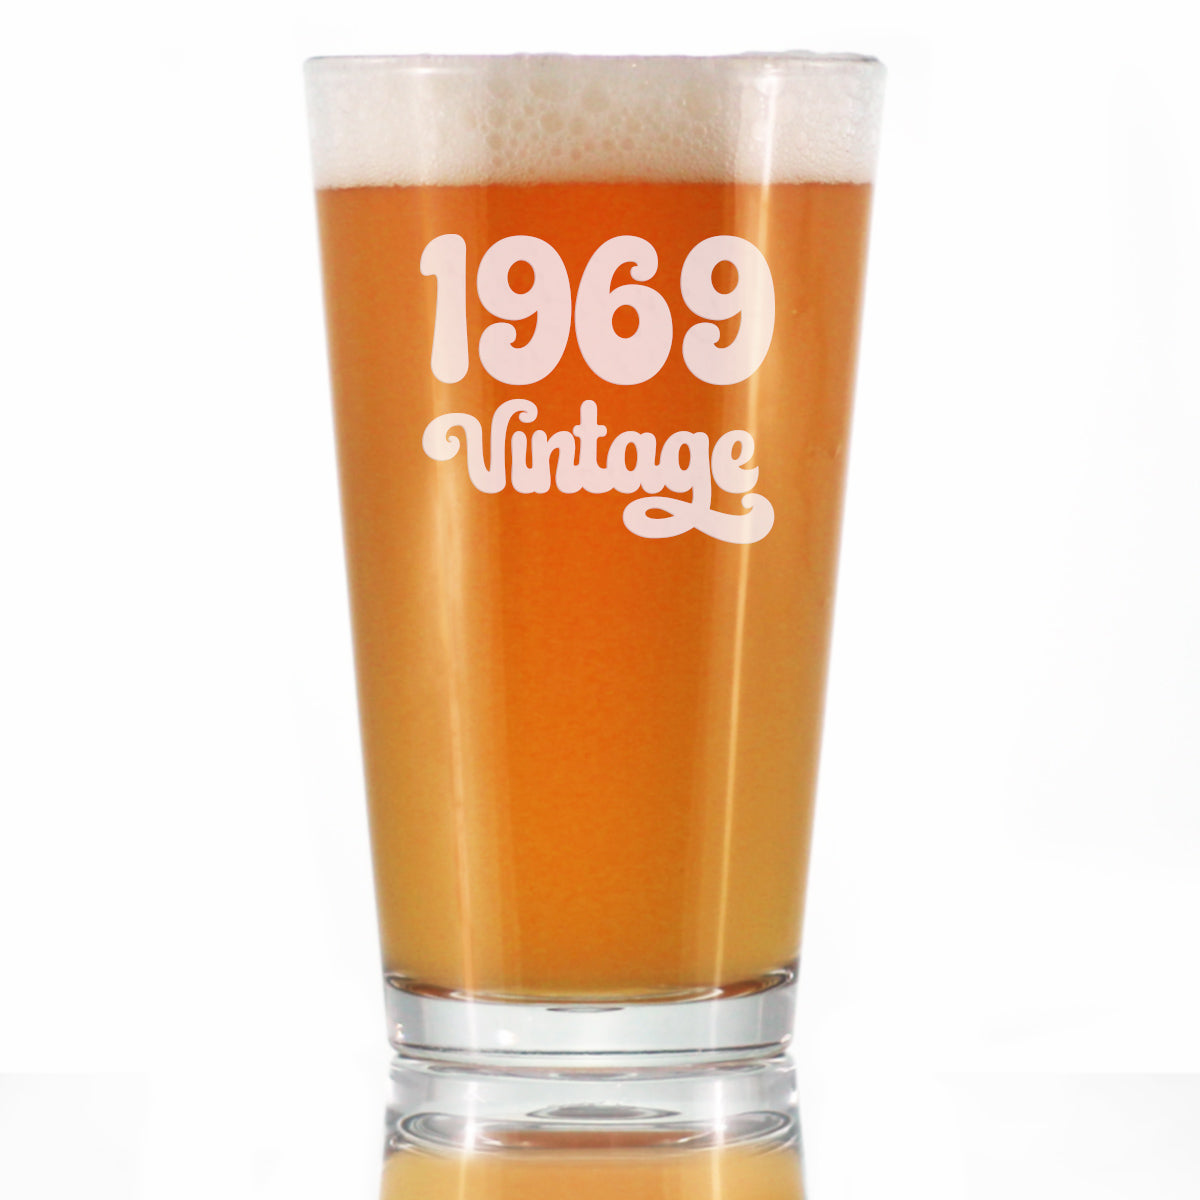 Vintage 1969 - Pint Glass for Beer - 54th Birthday Gifts for Men or Women Turning 54 - Fun Bday Party Decor - 16 oz